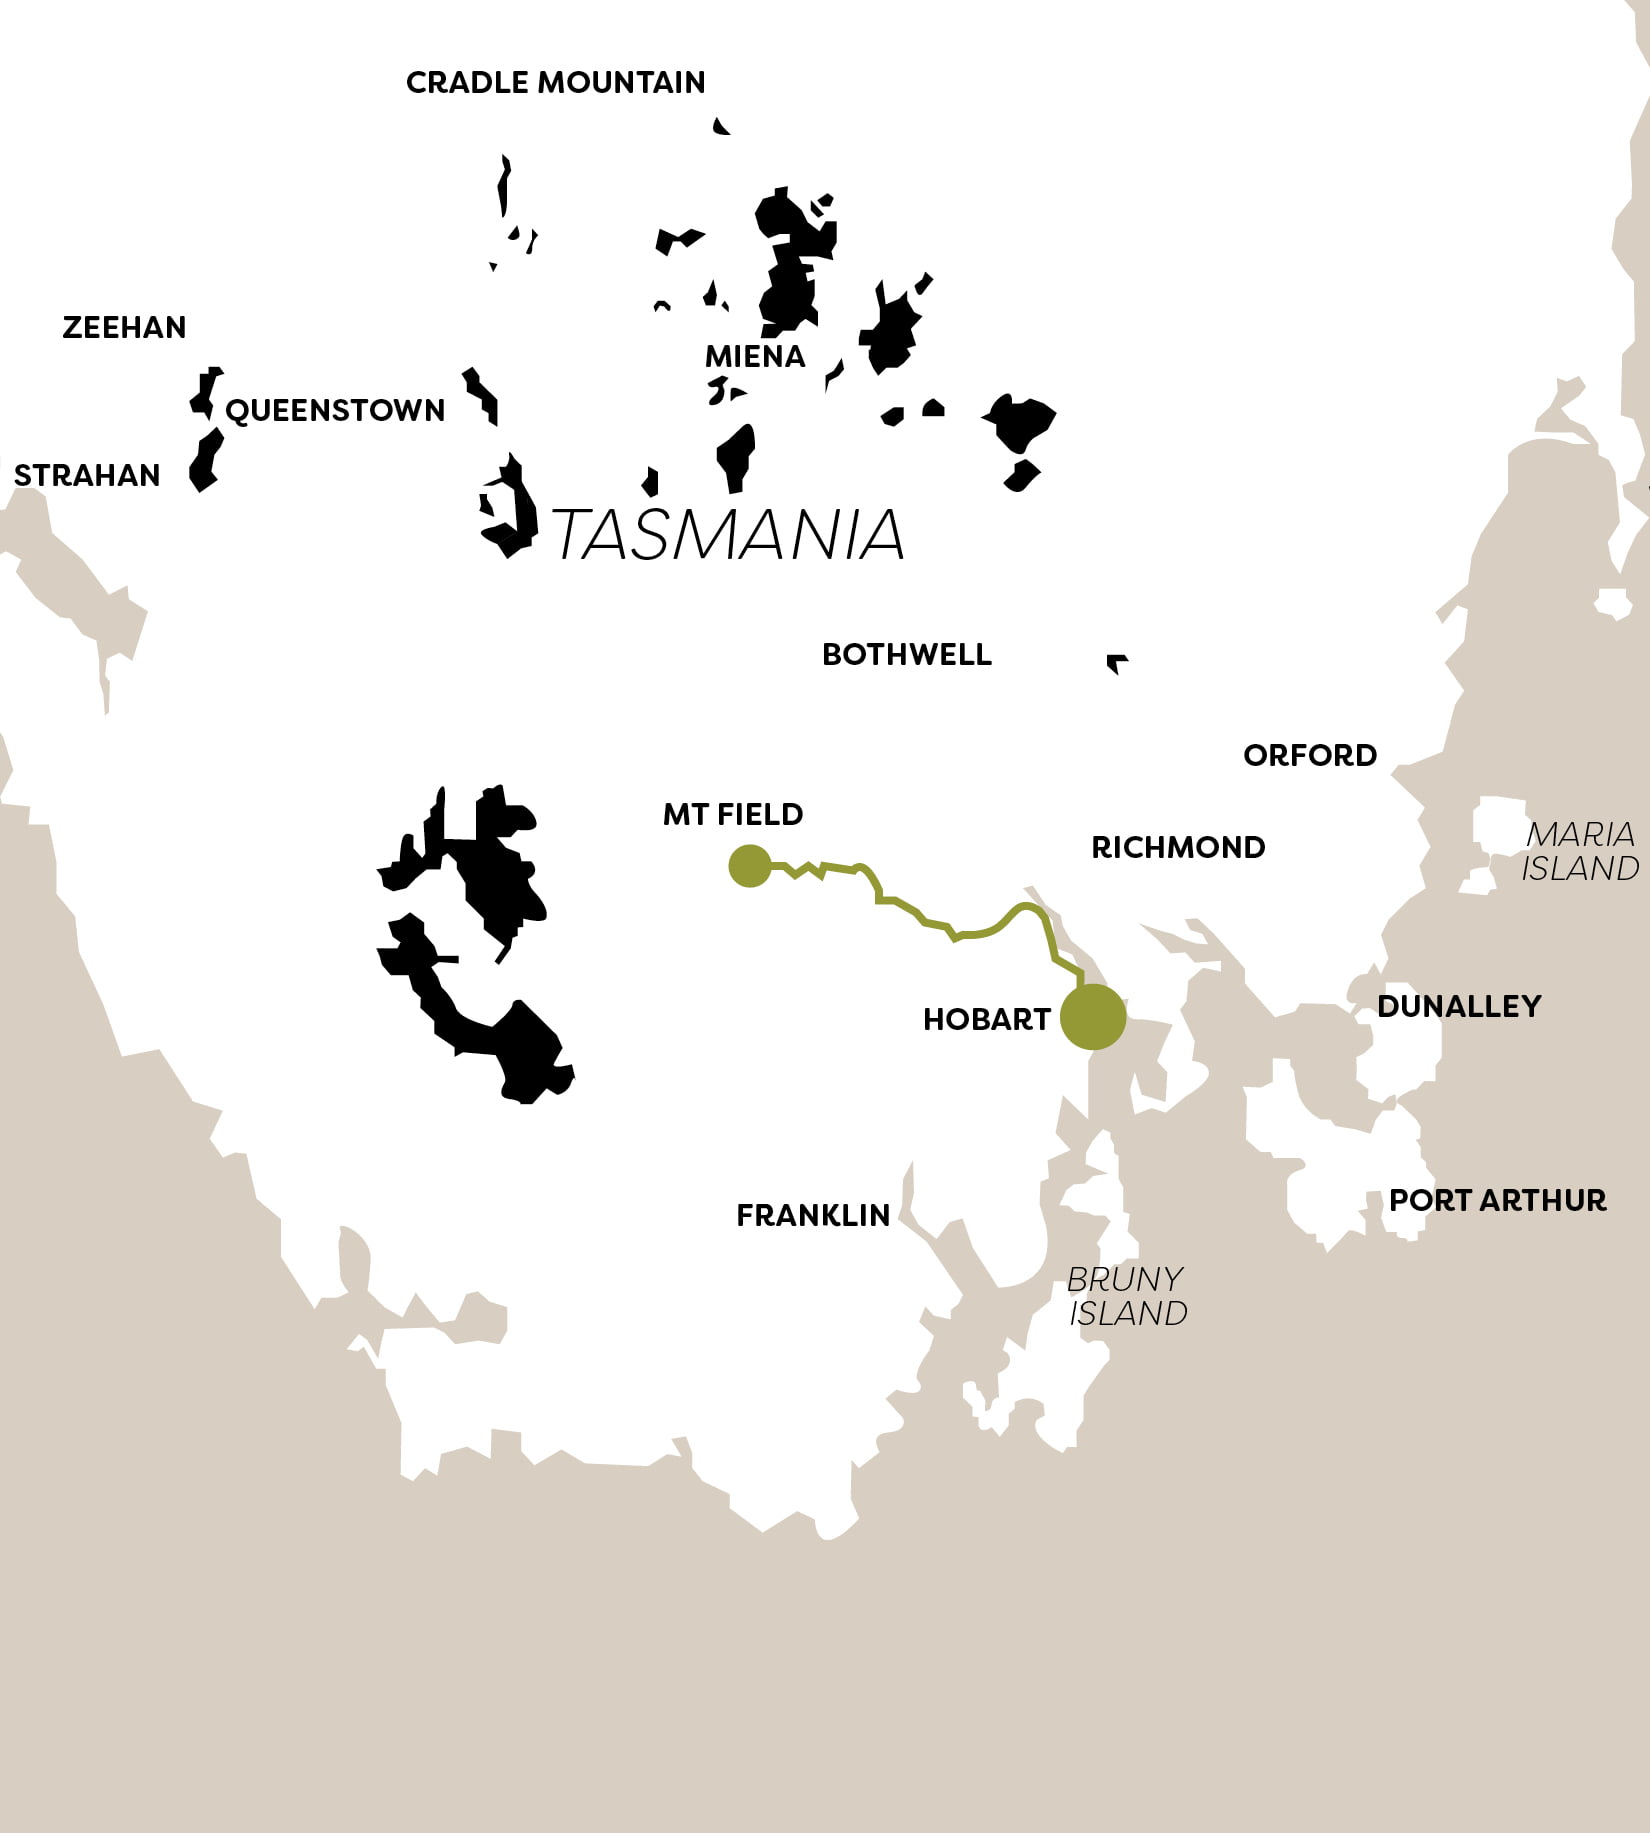 A map of Tasmania with the destination Mt Field highlighted.